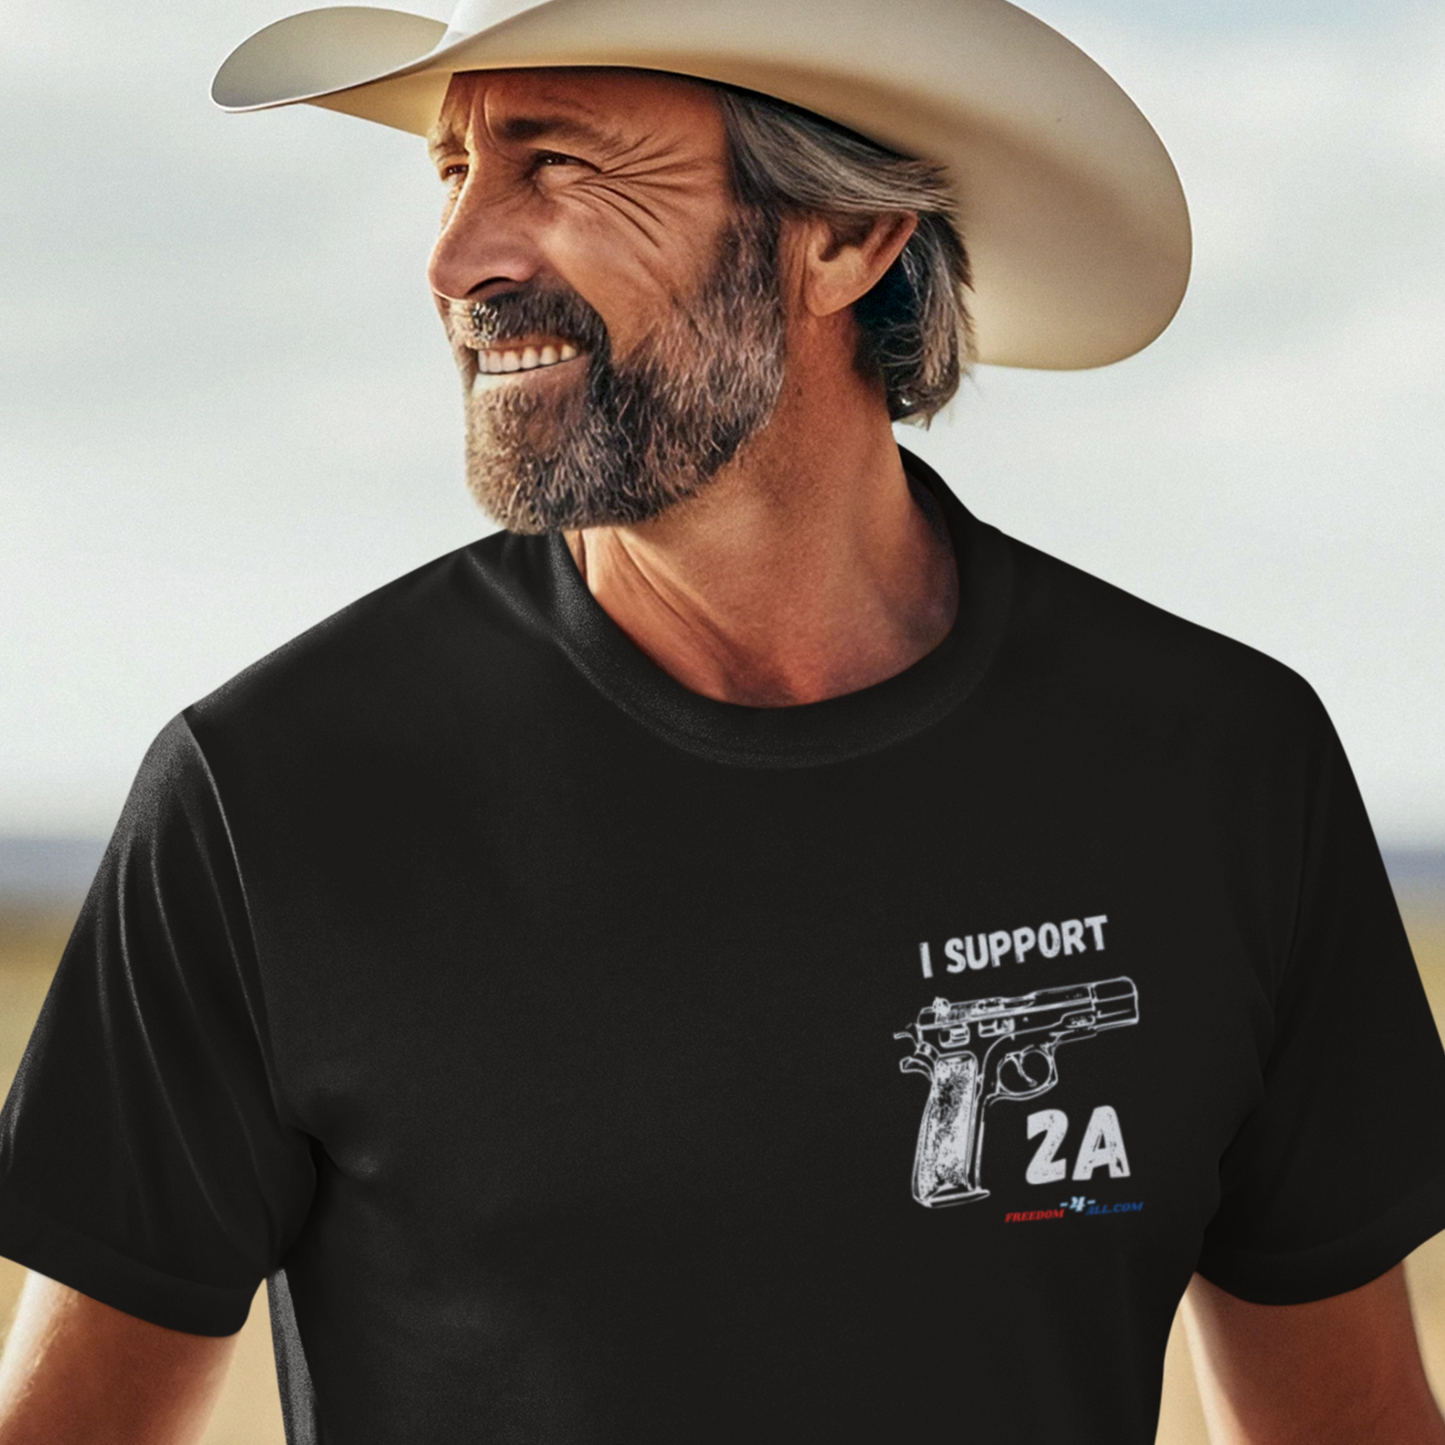 (2A-05) Protect 2A Unisex T-Shirt